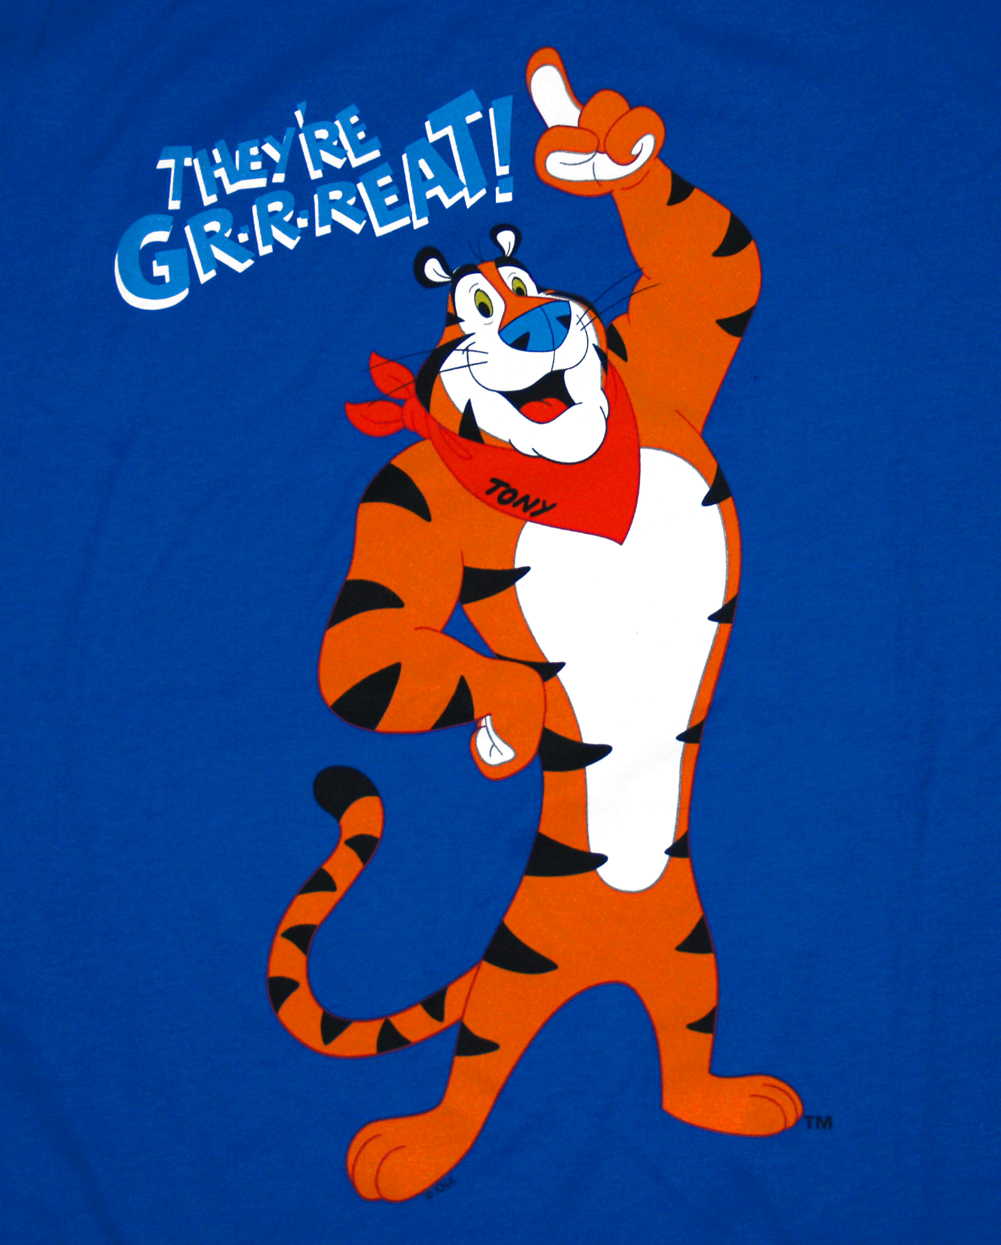 Tony The Tiger drawing free image download